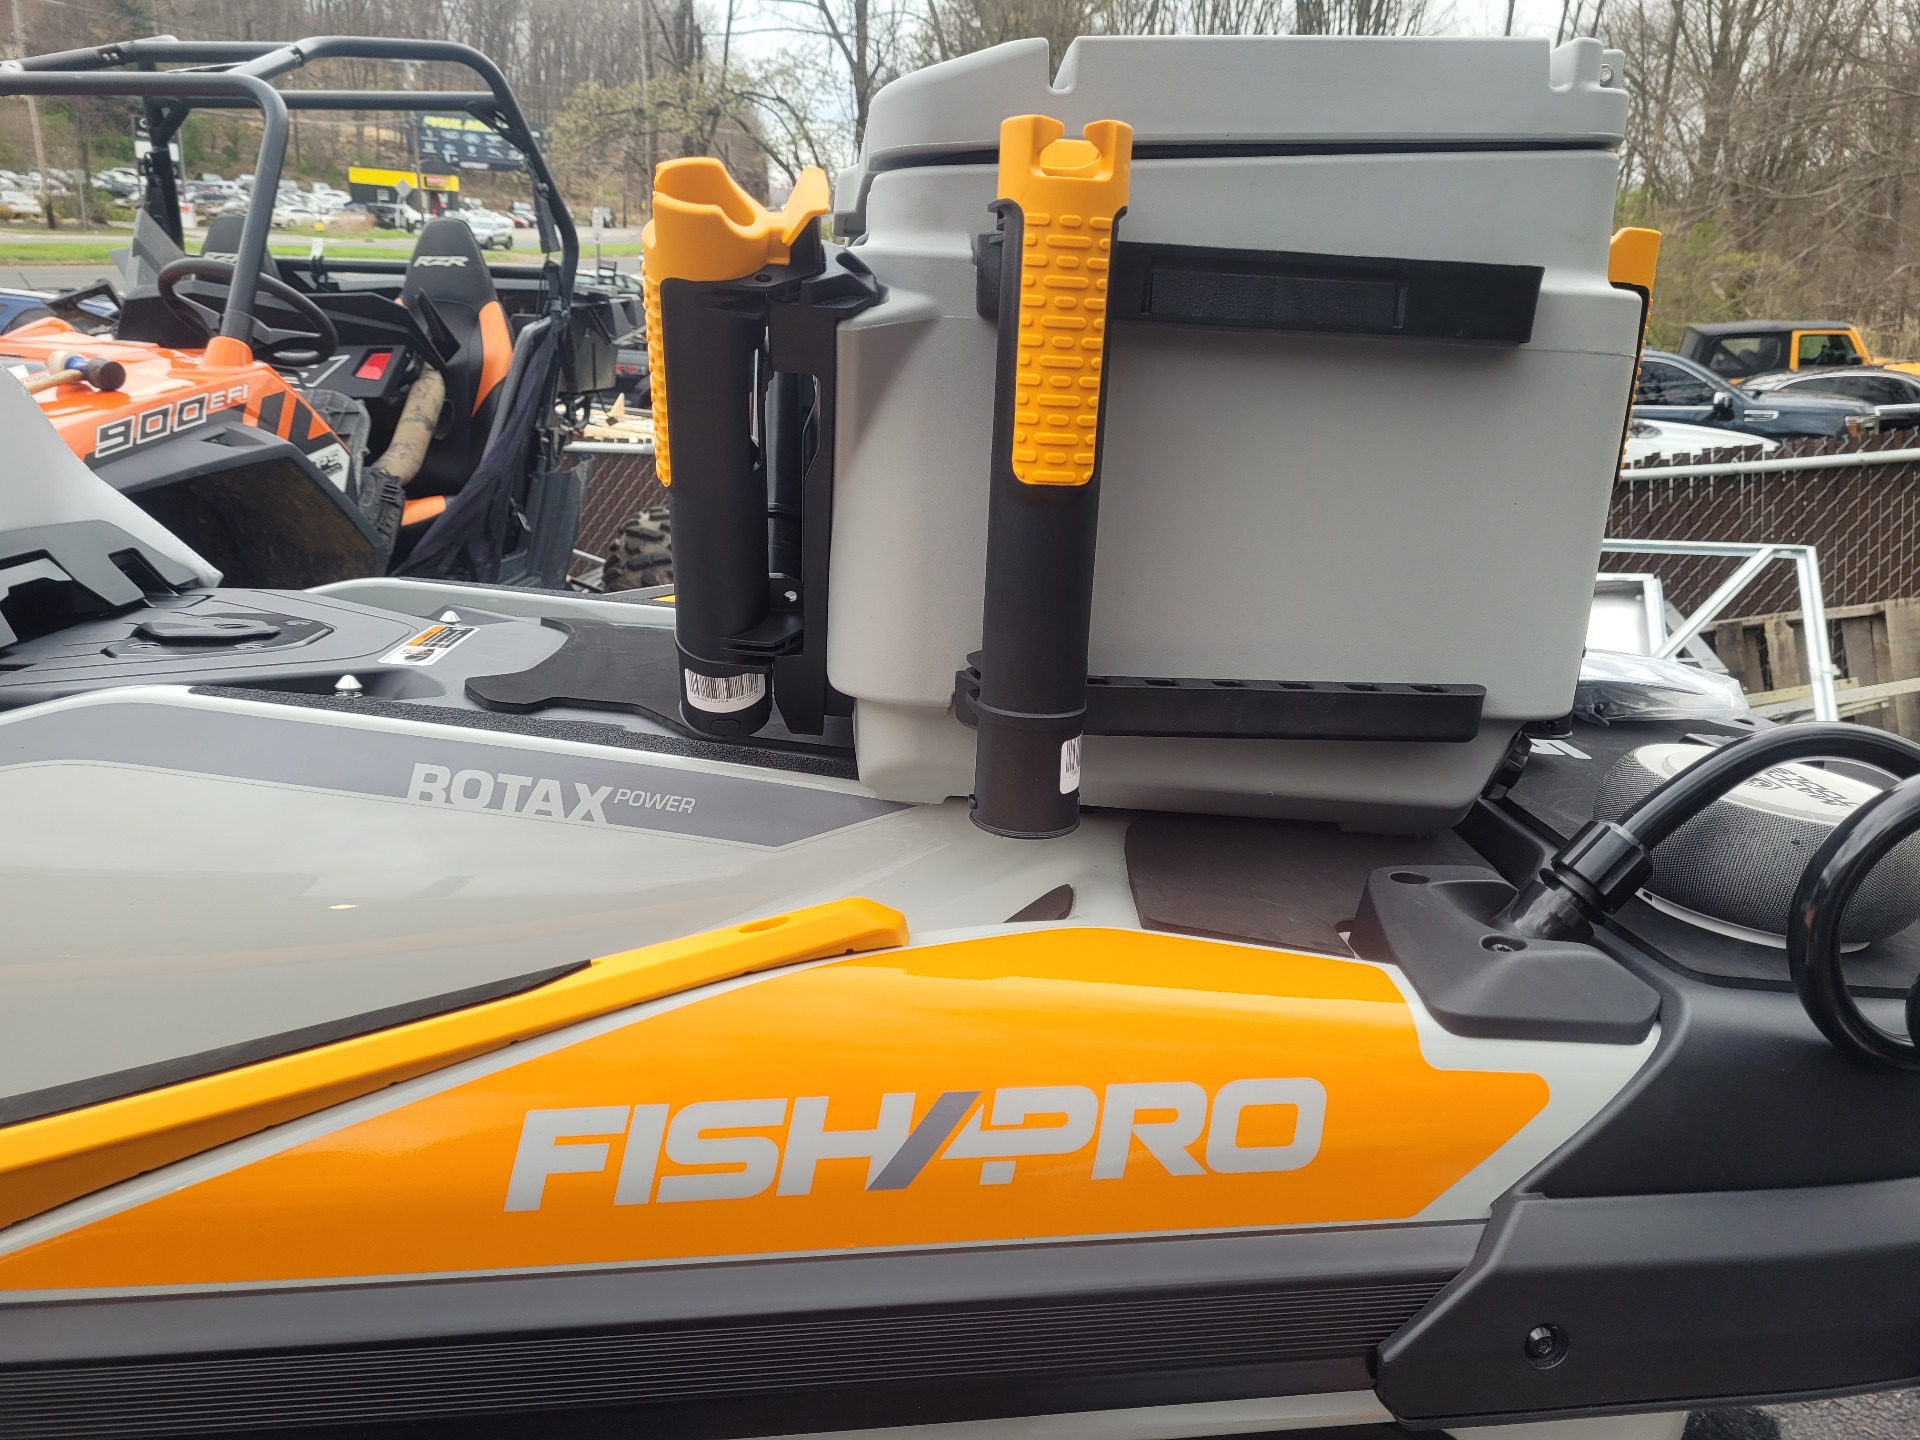 2022 Sea-Doo Fish Pro Trophy + Tech Package in Ledgewood, New Jersey - Photo 1